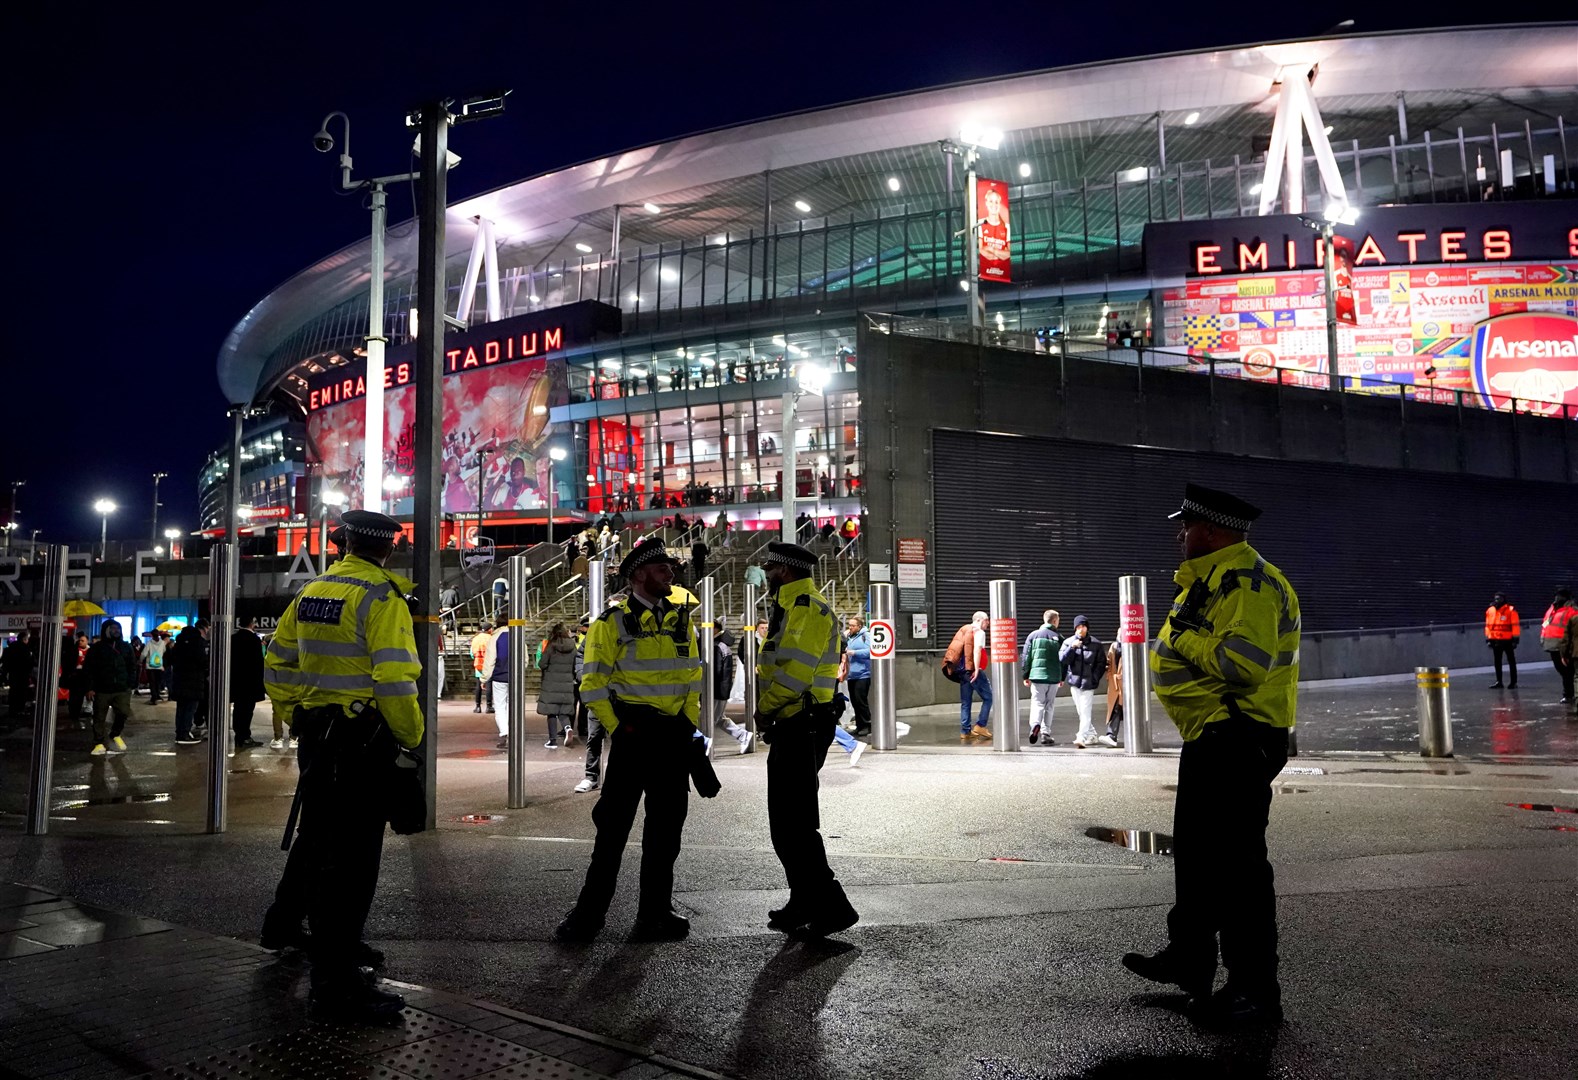 The Met’s Deputy Assistant Commissioner Ade Adelekan said the terrorism threat remains at ‘substantial’ ahead of the match (Zac Goodwin/PA)